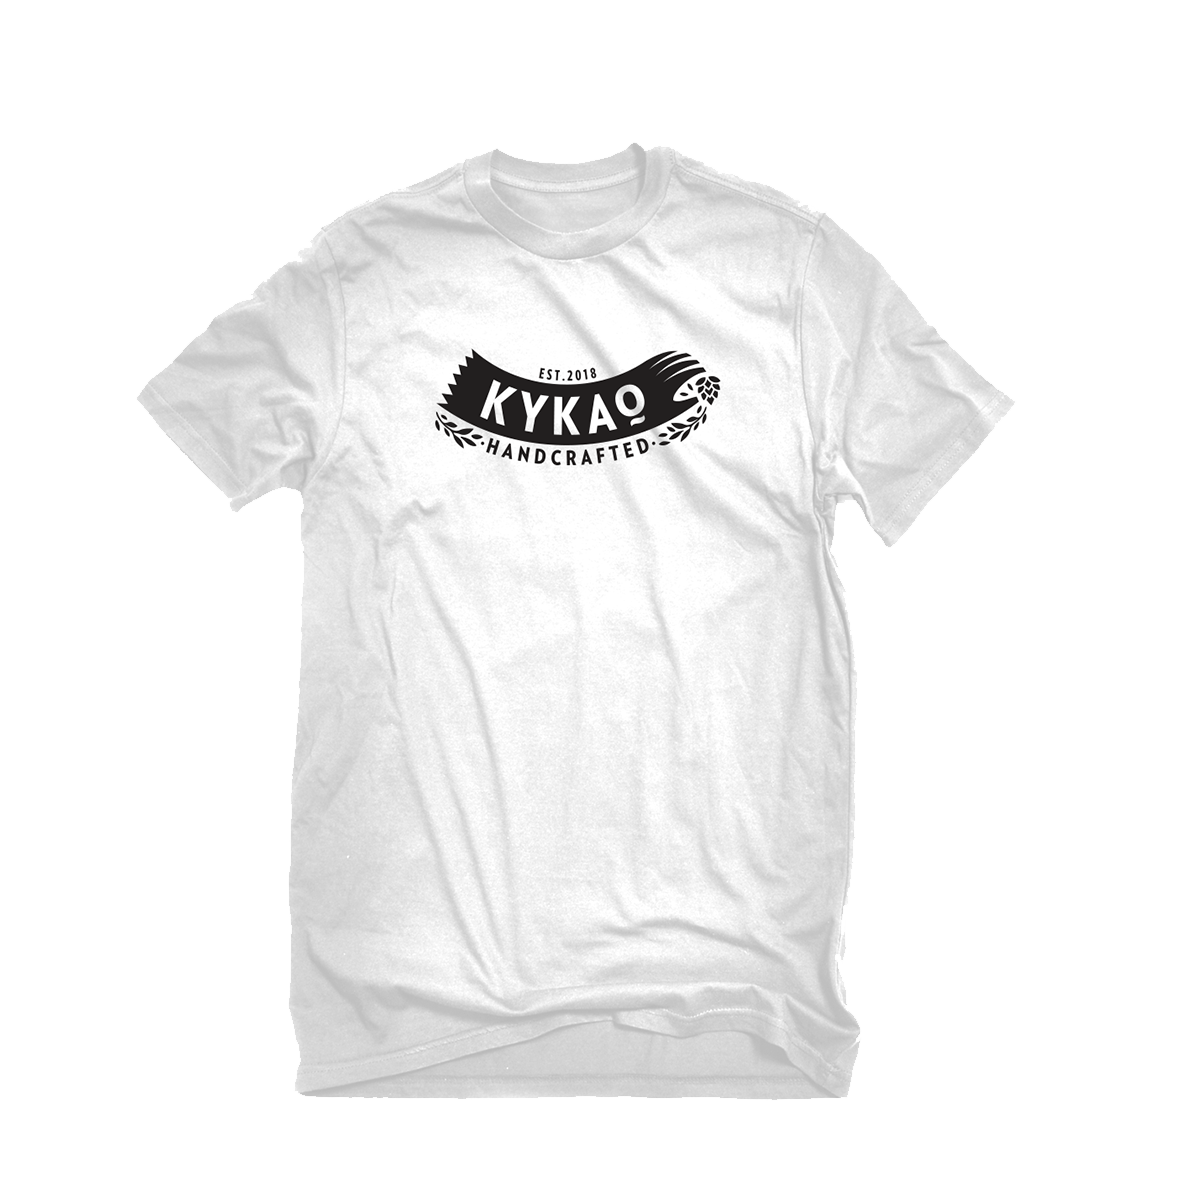 Kykao - Handcrafted T-shirt